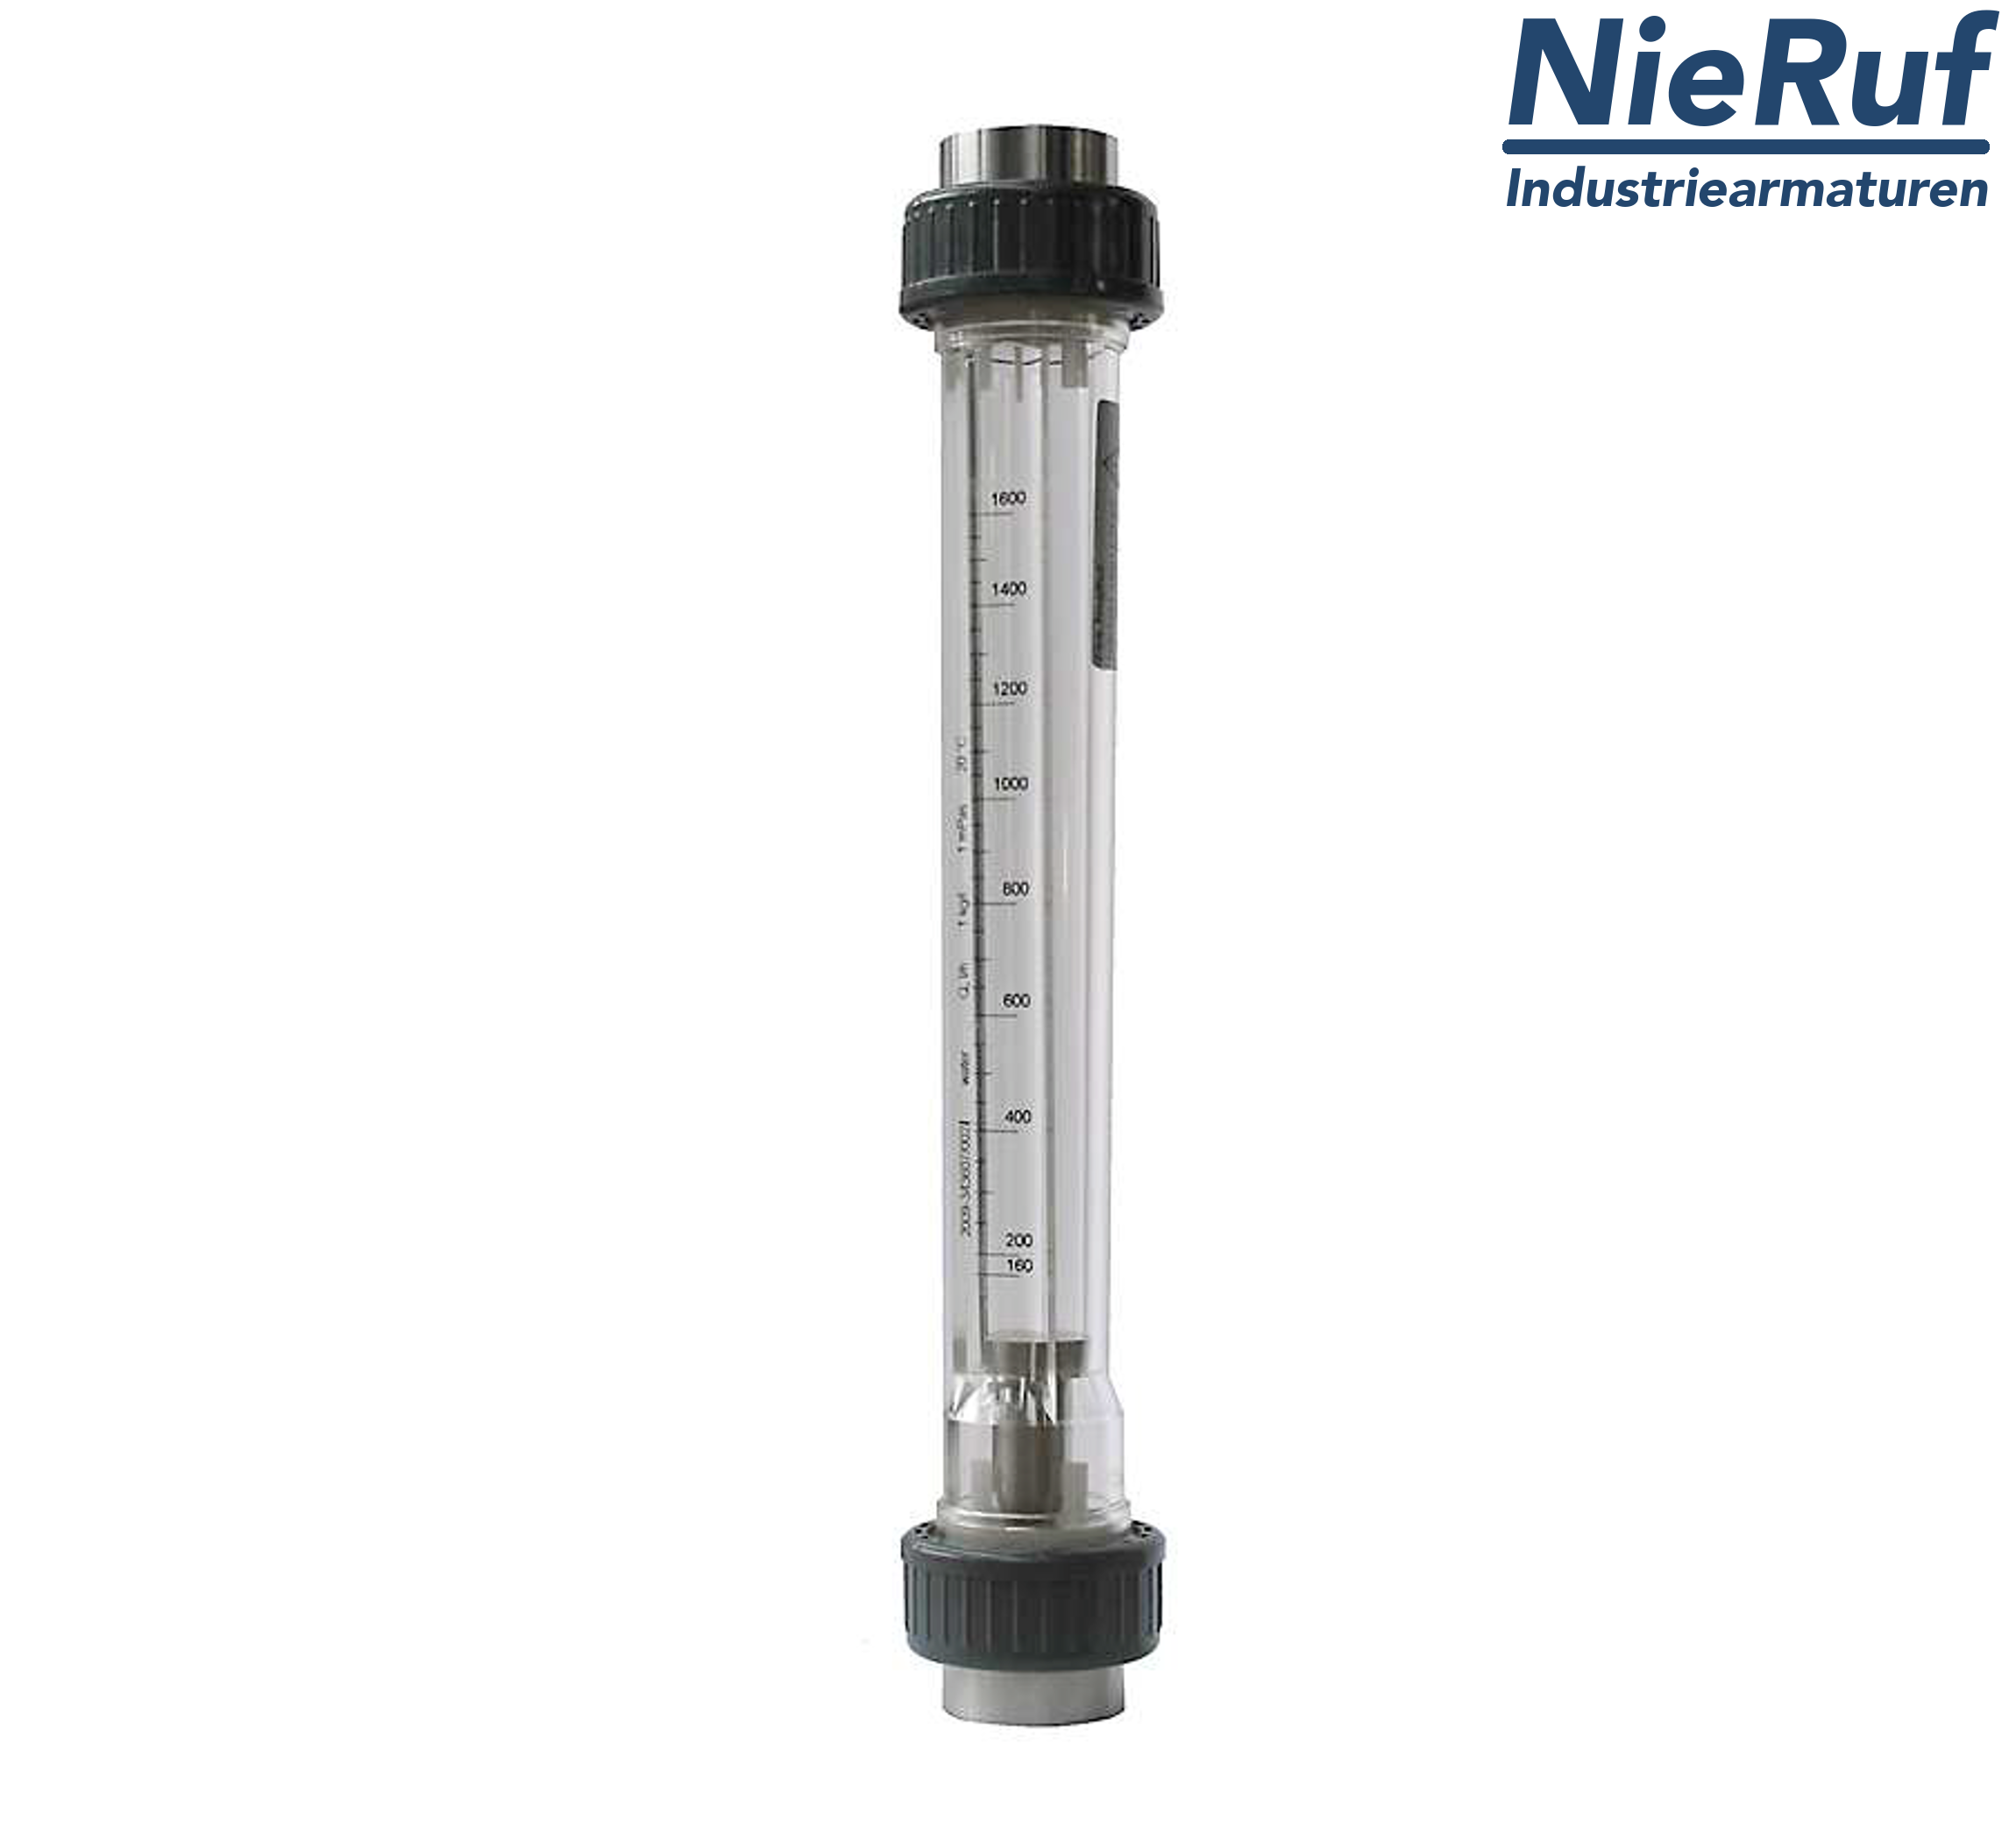 Variable area flowmeter 1 1/4" inch 400.0 - 4000 l/h water FKM